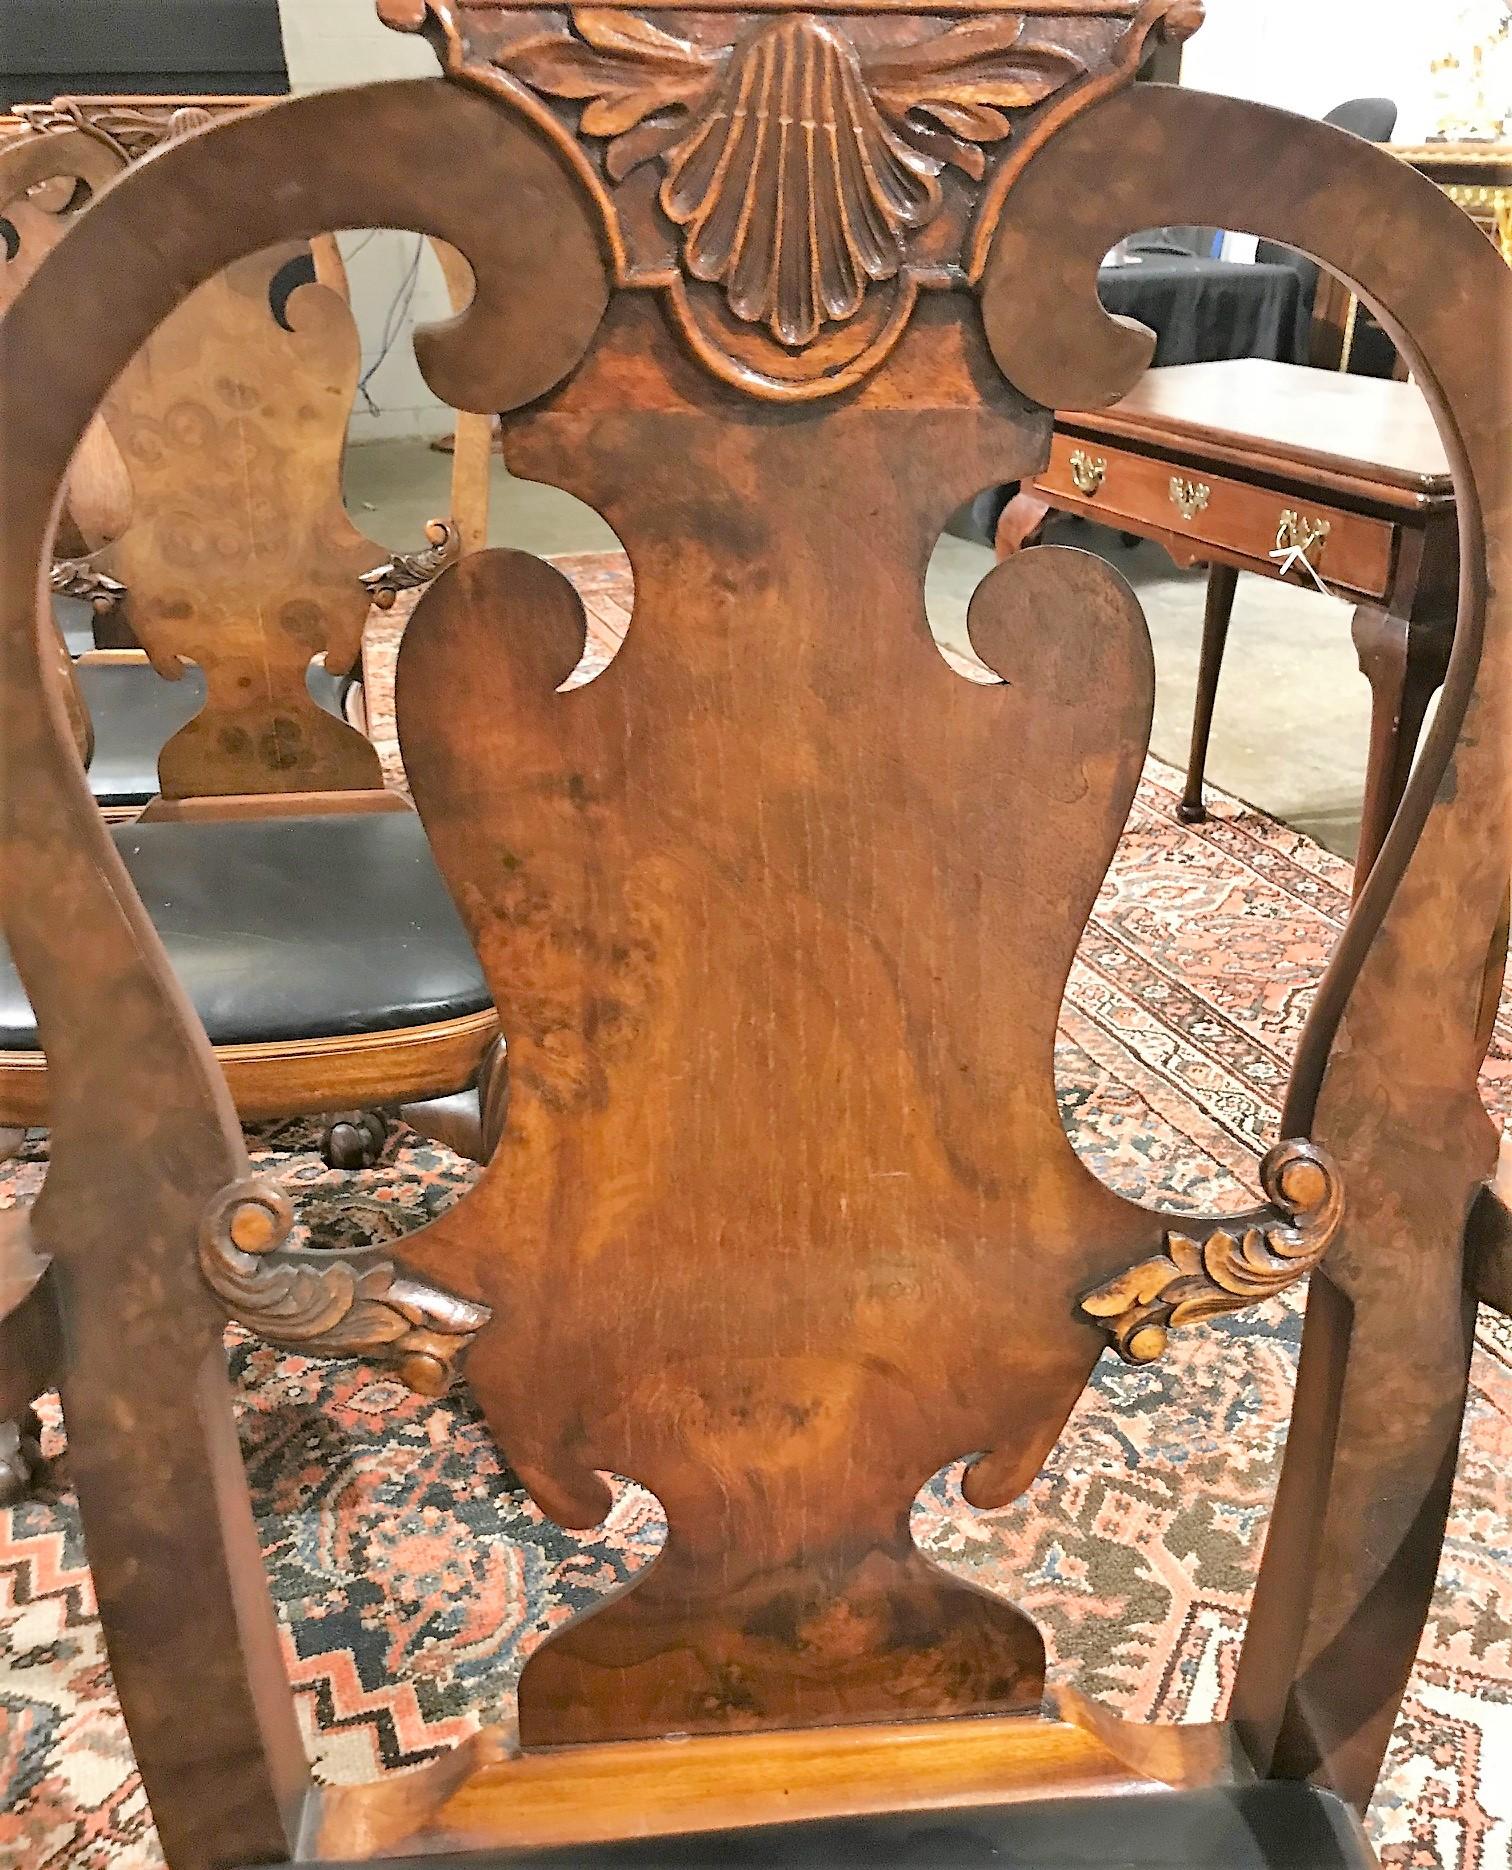 Superb set of antique English Queen Anne style walnut dining chairs comprising six side chairs and two shepherd's crook armchairs. Each with carved leaf and shell crests, spoon backs, shaped splats, and balloon slip seats. The front legs of cabriole